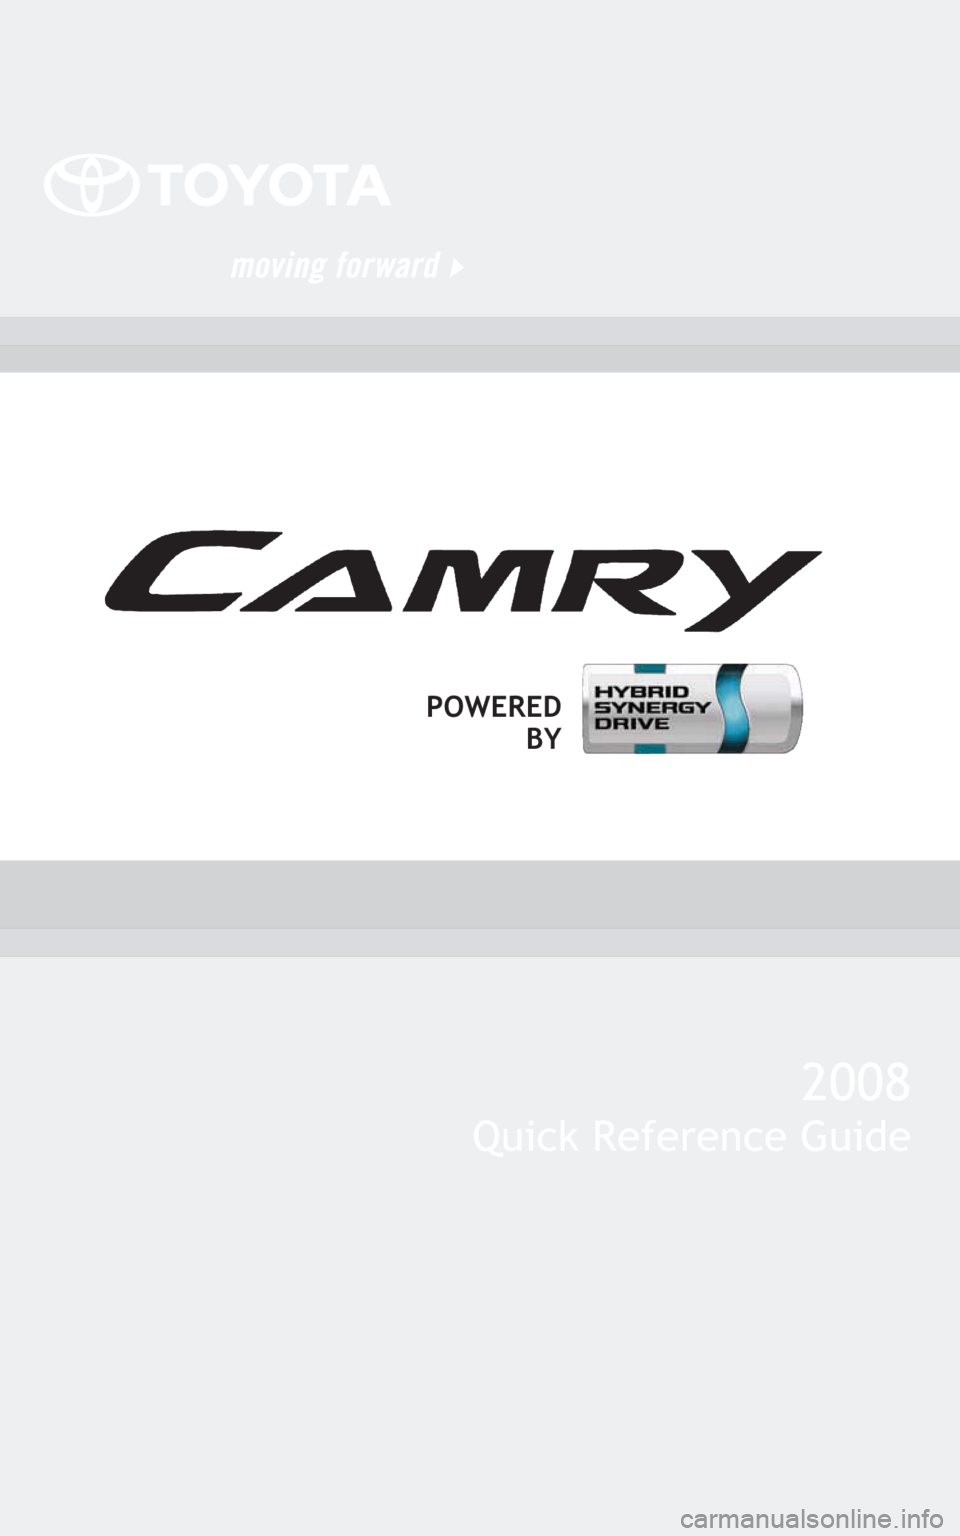 TOYOTA CAMRY HYBRID 2008 XV40 / 8.G Quick Reference Guide 2008
Quick Reference Guide
POWERED
BY 